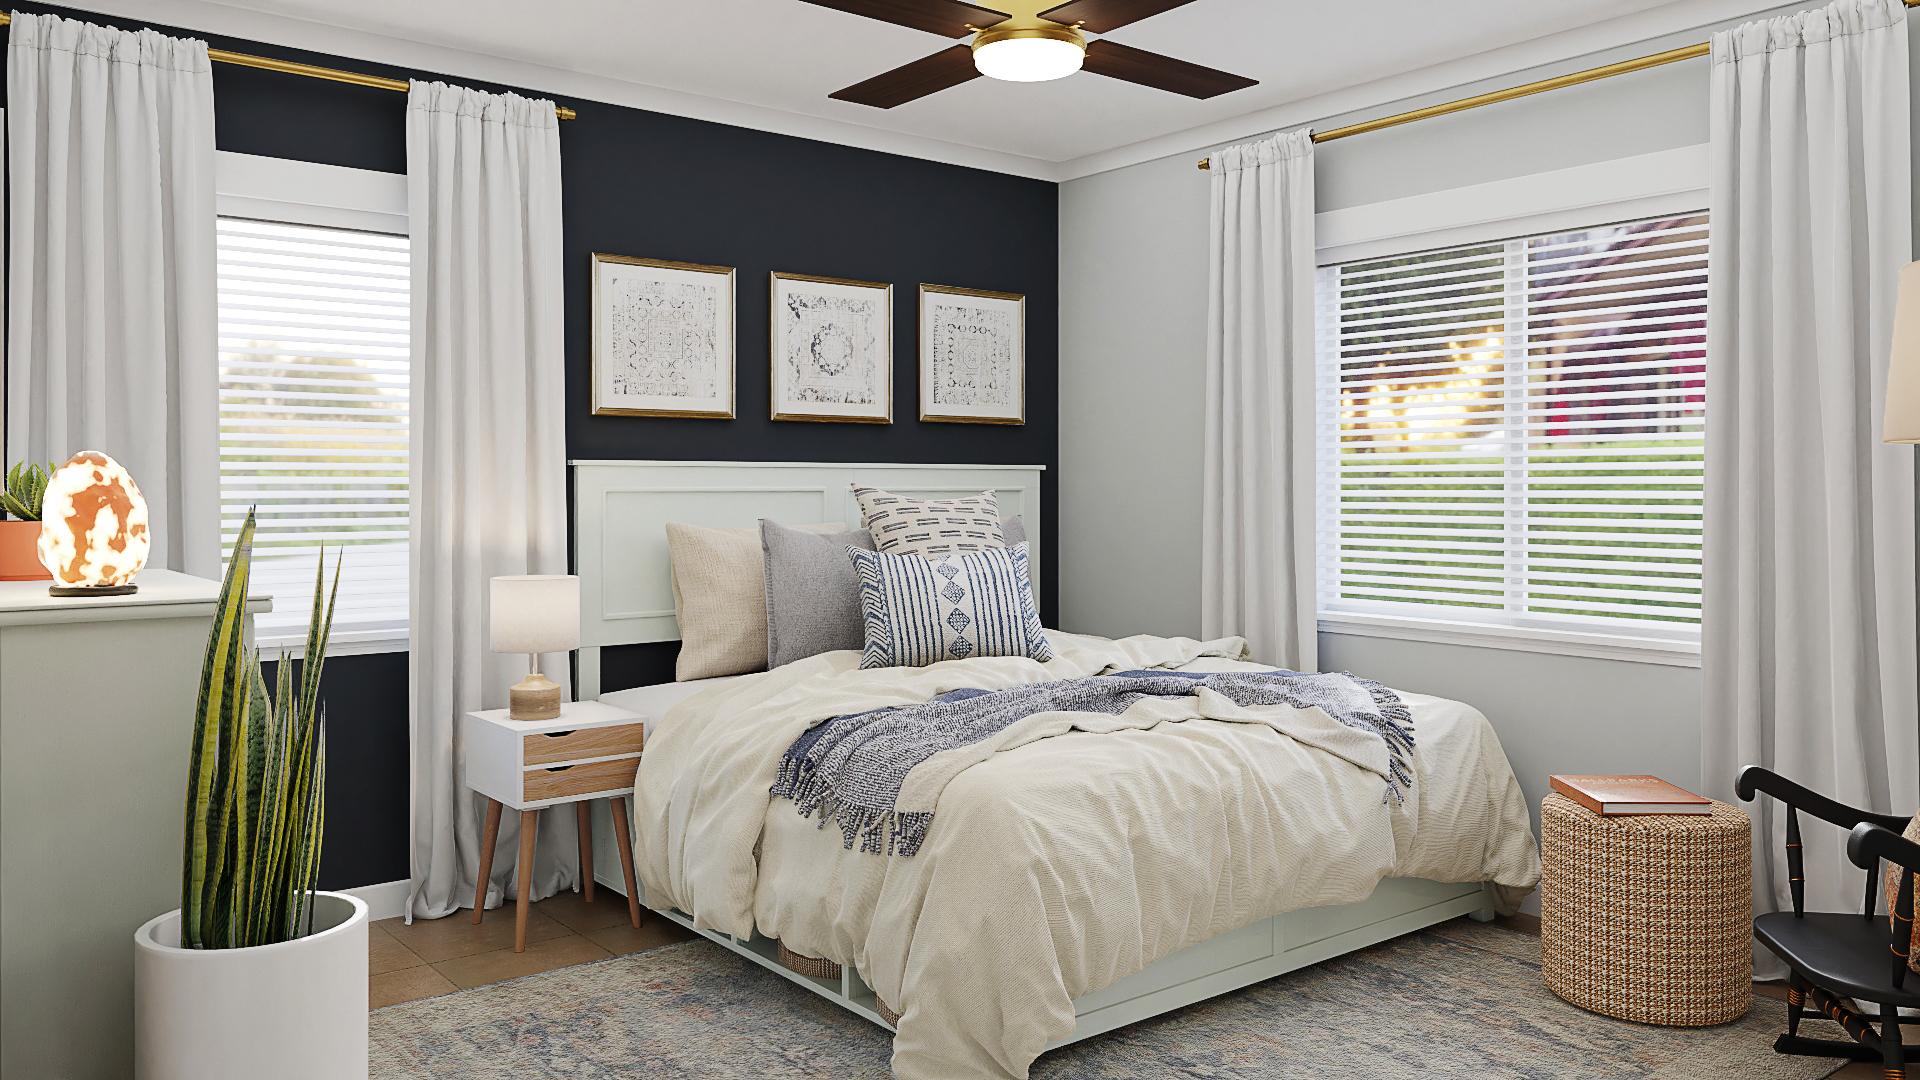 A Rustic Farmhouse Bedroom Enriched In Navy Hues